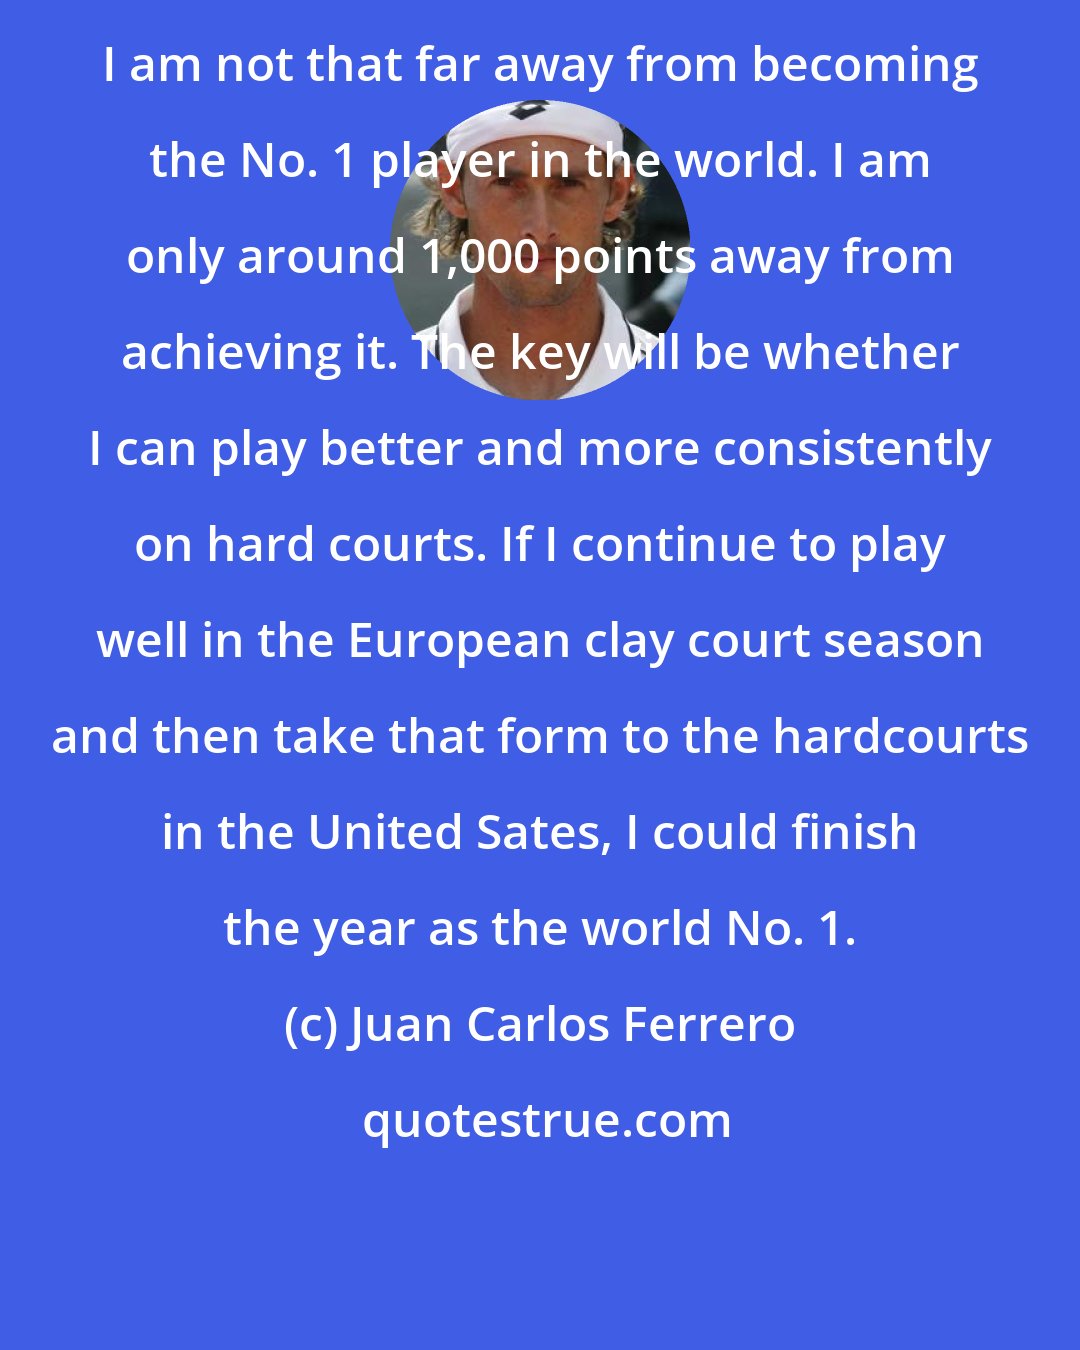 Juan Carlos Ferrero: I am not that far away from becoming the No. 1 player in the world. I am only around 1,000 points away from achieving it. The key will be whether I can play better and more consistently on hard courts. If I continue to play well in the European clay court season and then take that form to the hardcourts in the United Sates, I could finish the year as the world No. 1.